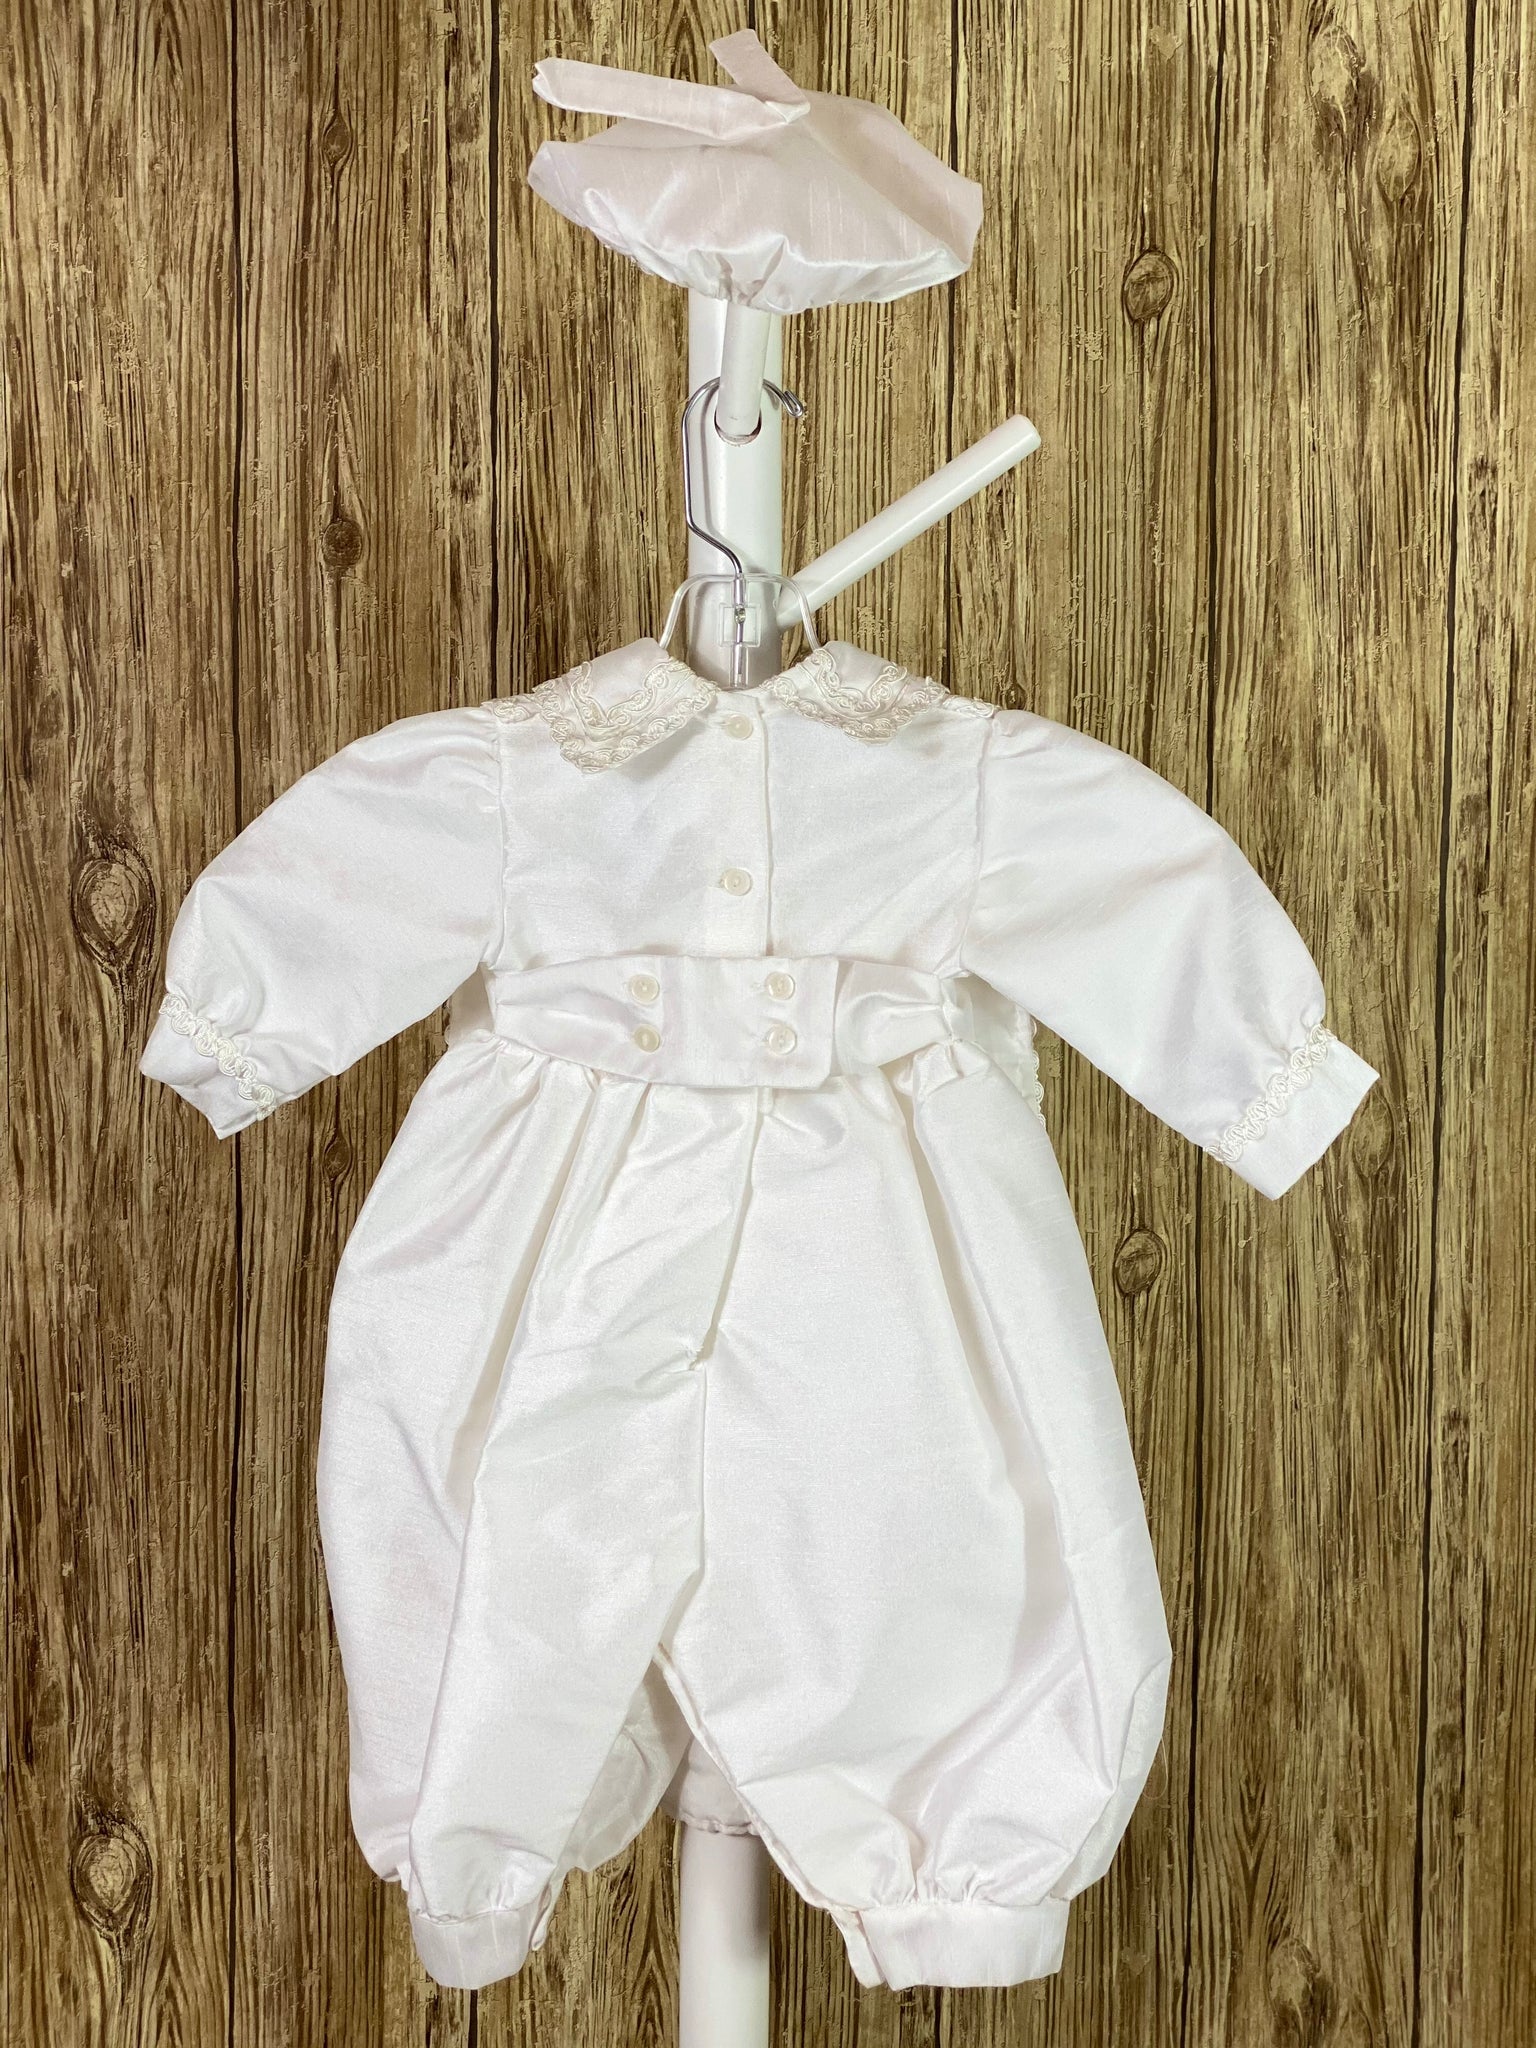 WHITE  3-piece white set including beret, one piece stole, romper Collared shirt with long sleeves Buttoning on pant cuffs Button closure on back of romper Wide embroidered trim along edge of stole and collar Thin embroidered trim along sleeve cuff edge Large pearl beaded cross on front of stole